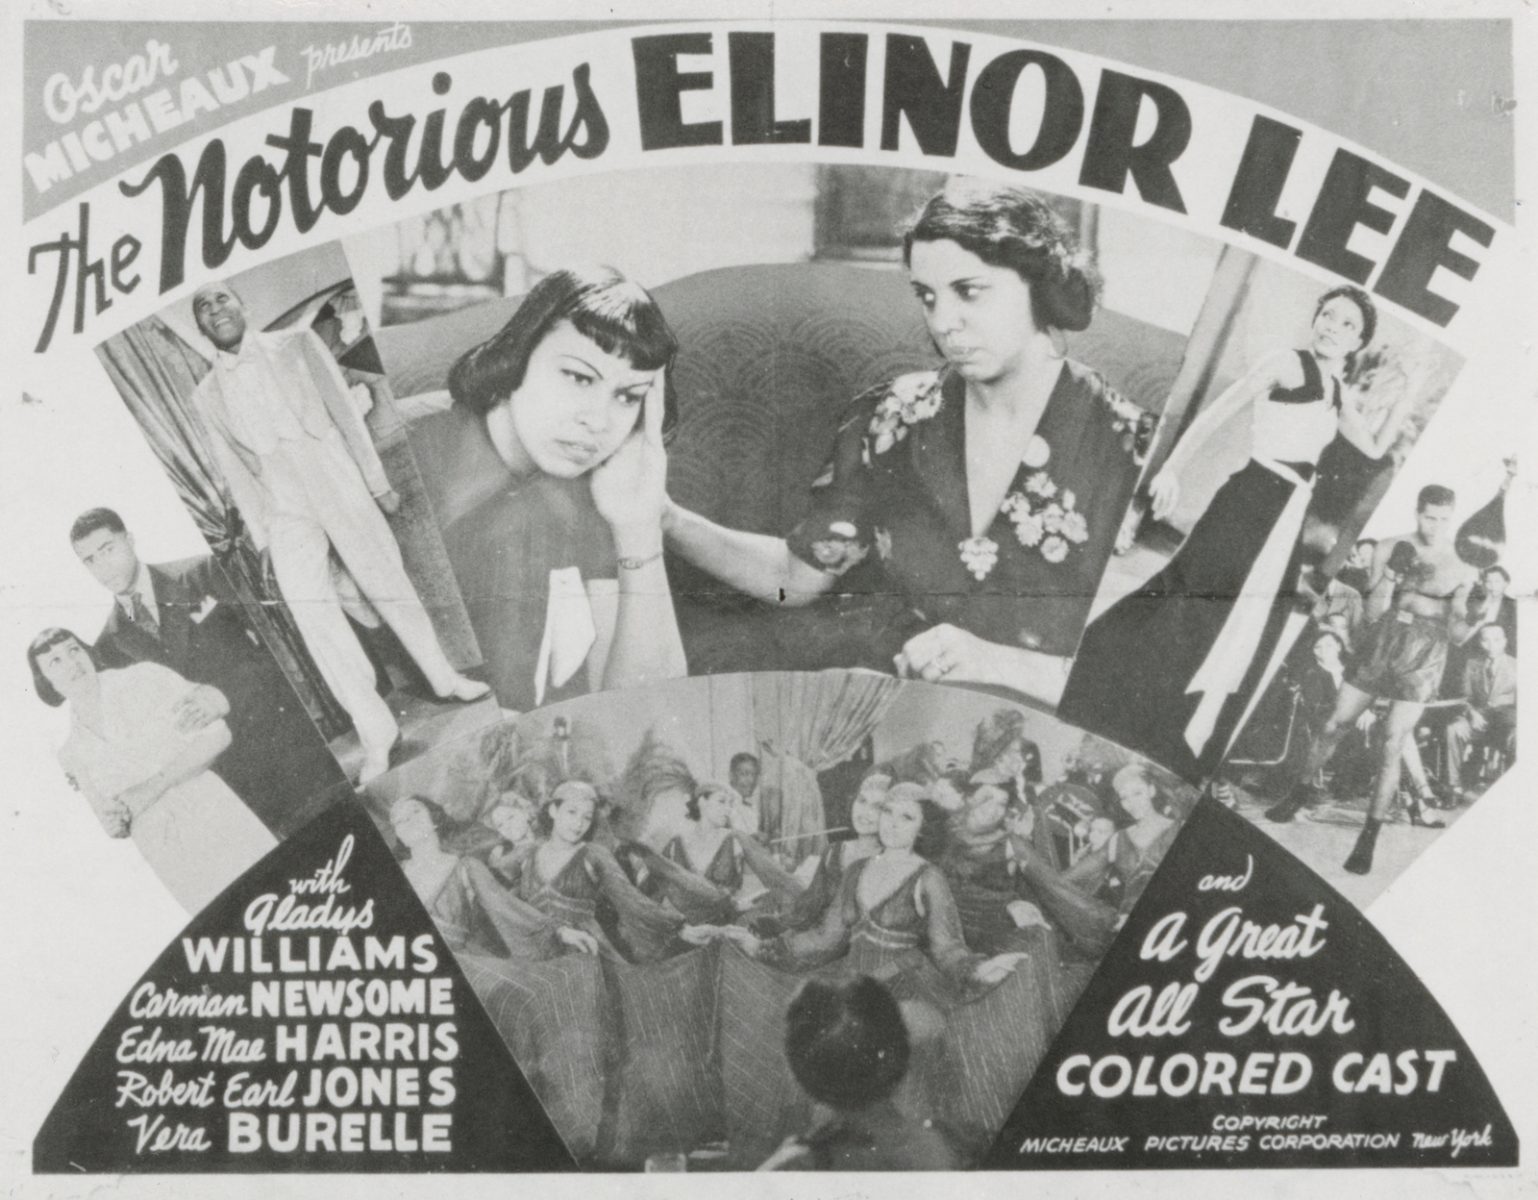 Promotional poster for the film, The Notorious Elinor Lee, by Oscar Micheaux.